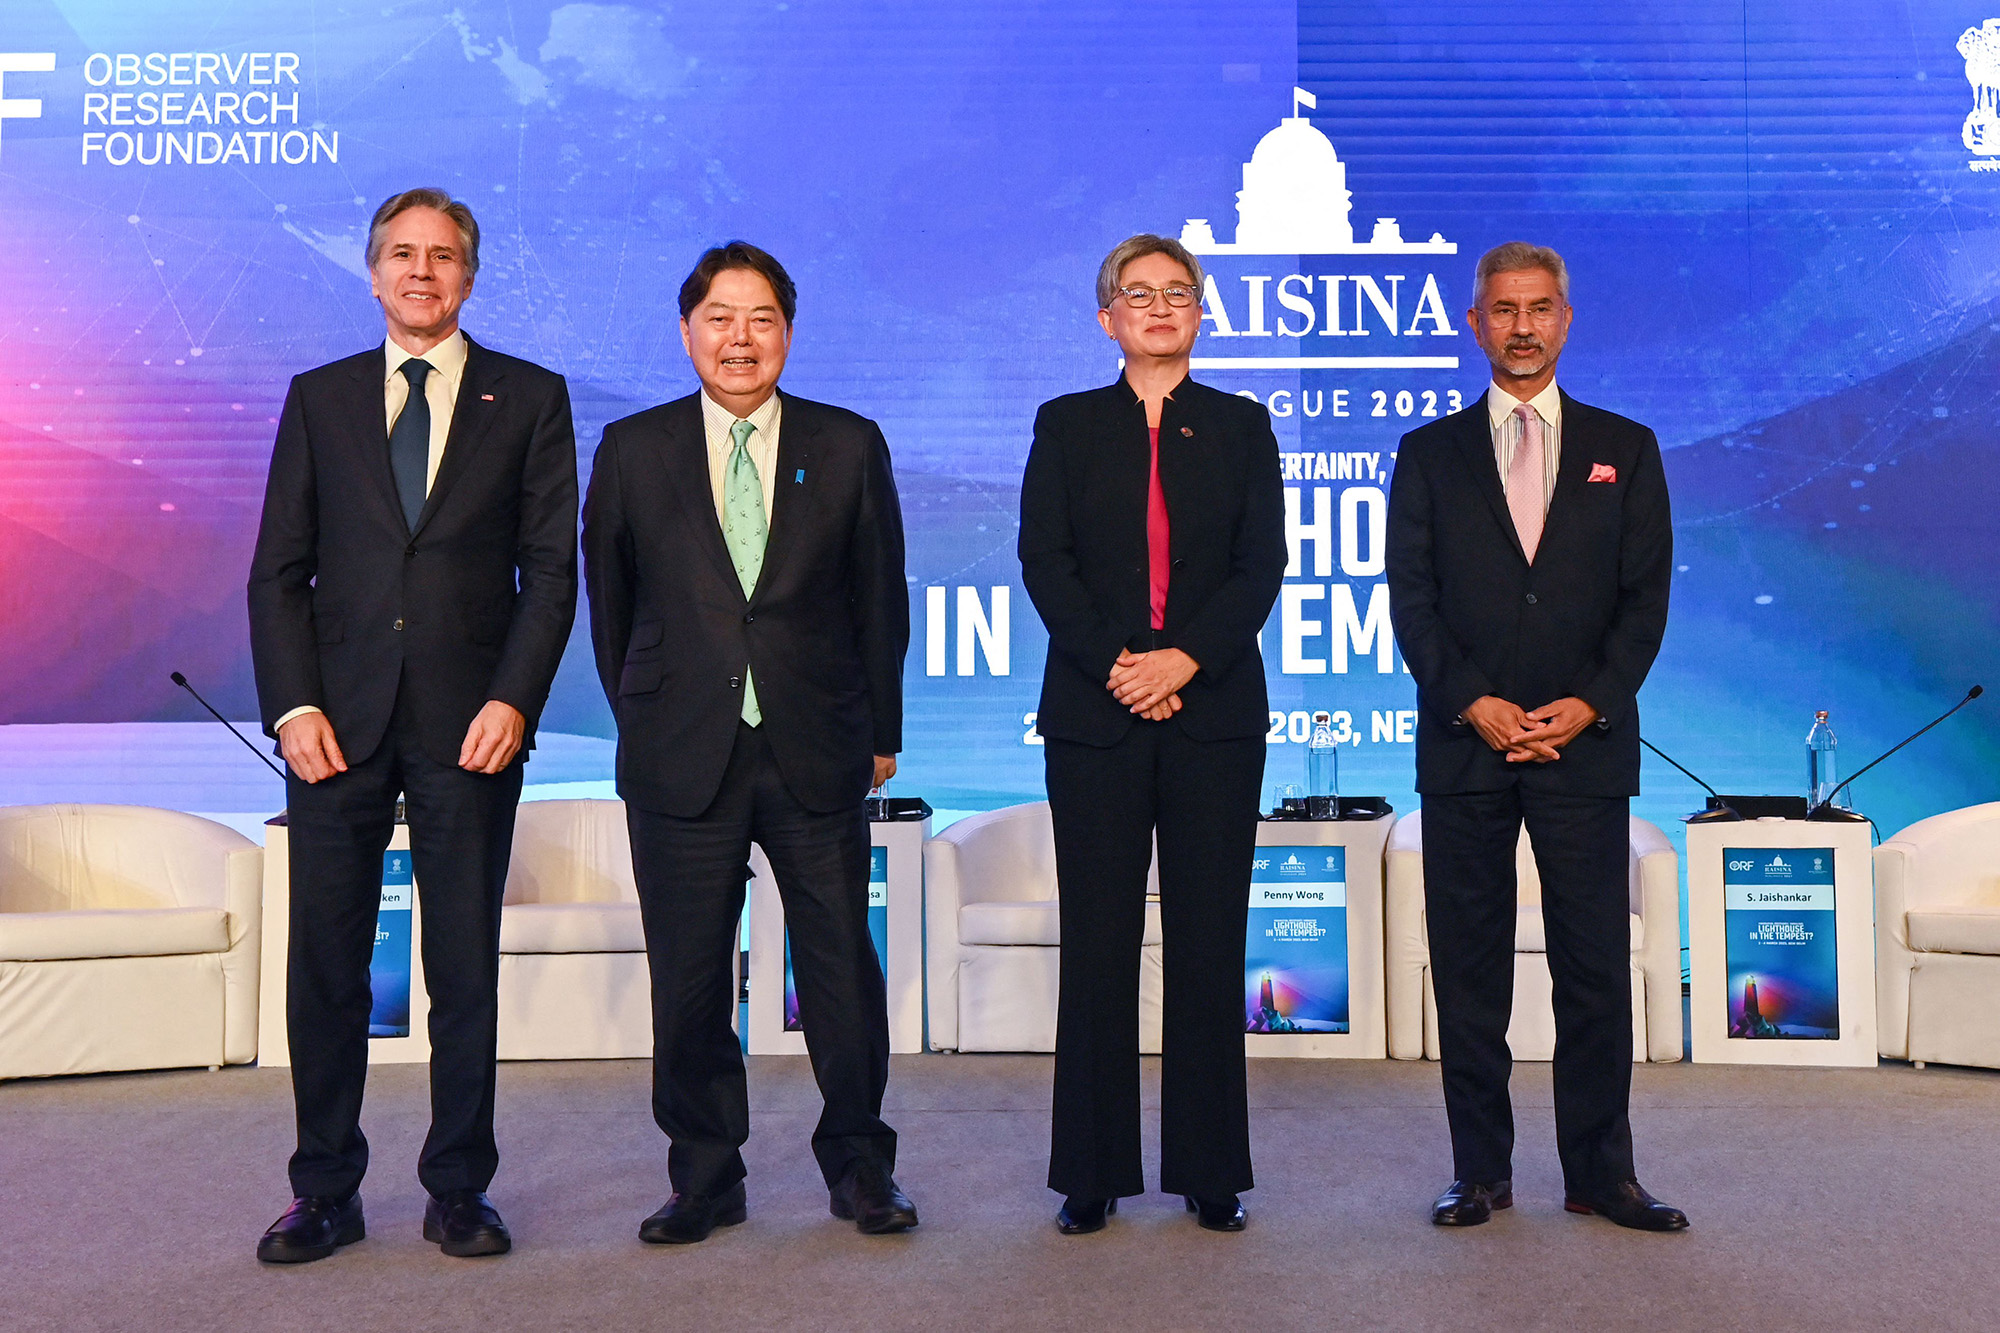 Left to right - US Secretary of State Antony Blinken, Japan Foreign Minister Yoshimasa Hayashi, Australian Foreign Minister Penny Wong and Indian Foreign Minister Subrahmanyam Jaishankar pose for a photograph after the Indo-Pacific Quad Foreign Ministers panel discussion in New Delhi, India, on March 3.